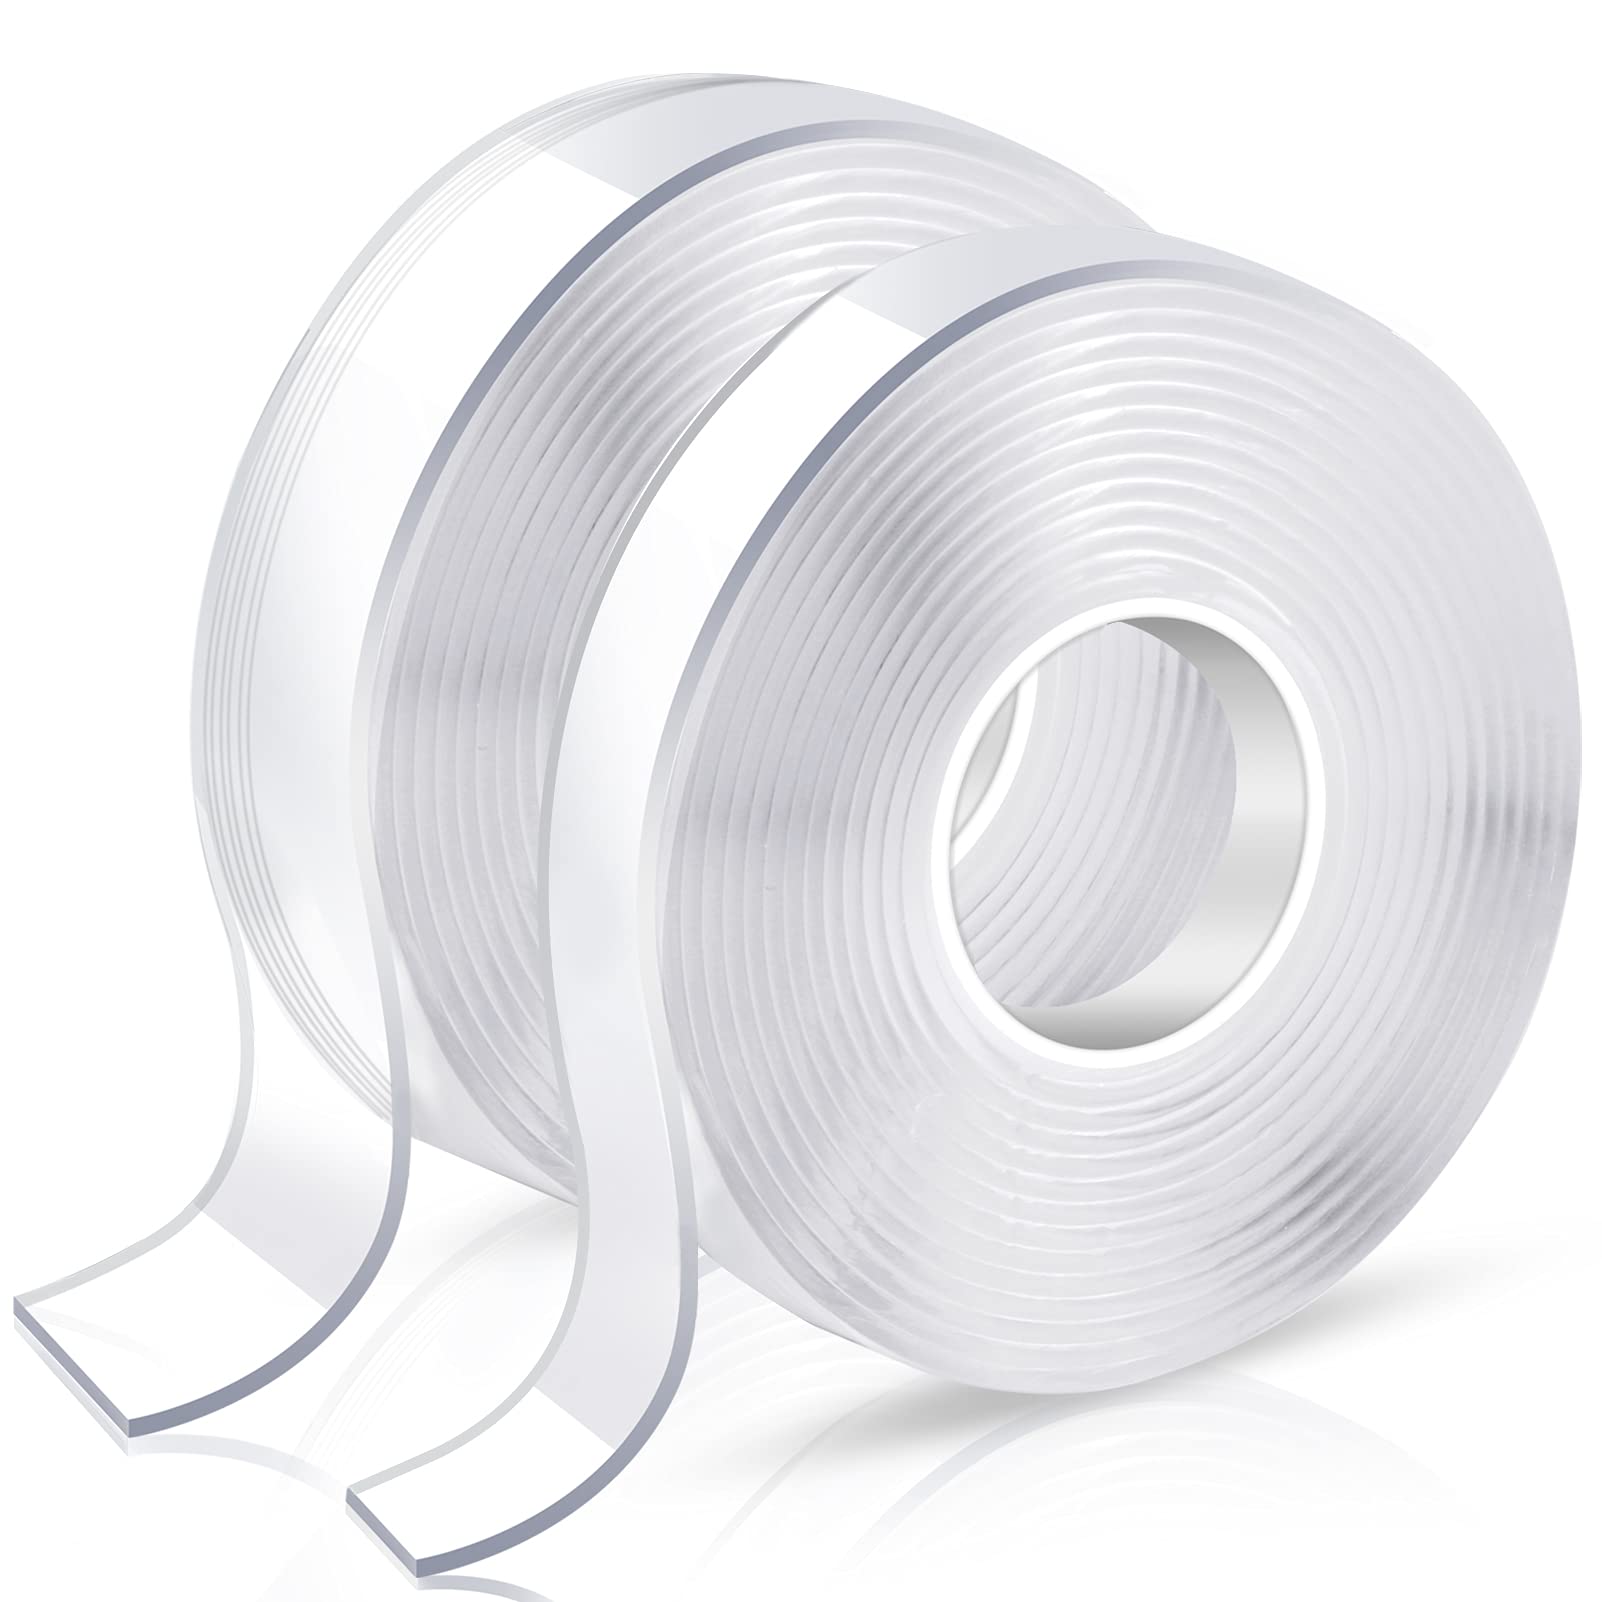 KUSUFEFI Double Sided Adhesive tape Heavy Duty Double Stick Mounting (2  Rolls Total 20FT) Clear Two Sided Wall tape Strips Removable Poster tape  for Home Office Car Outdoor Use